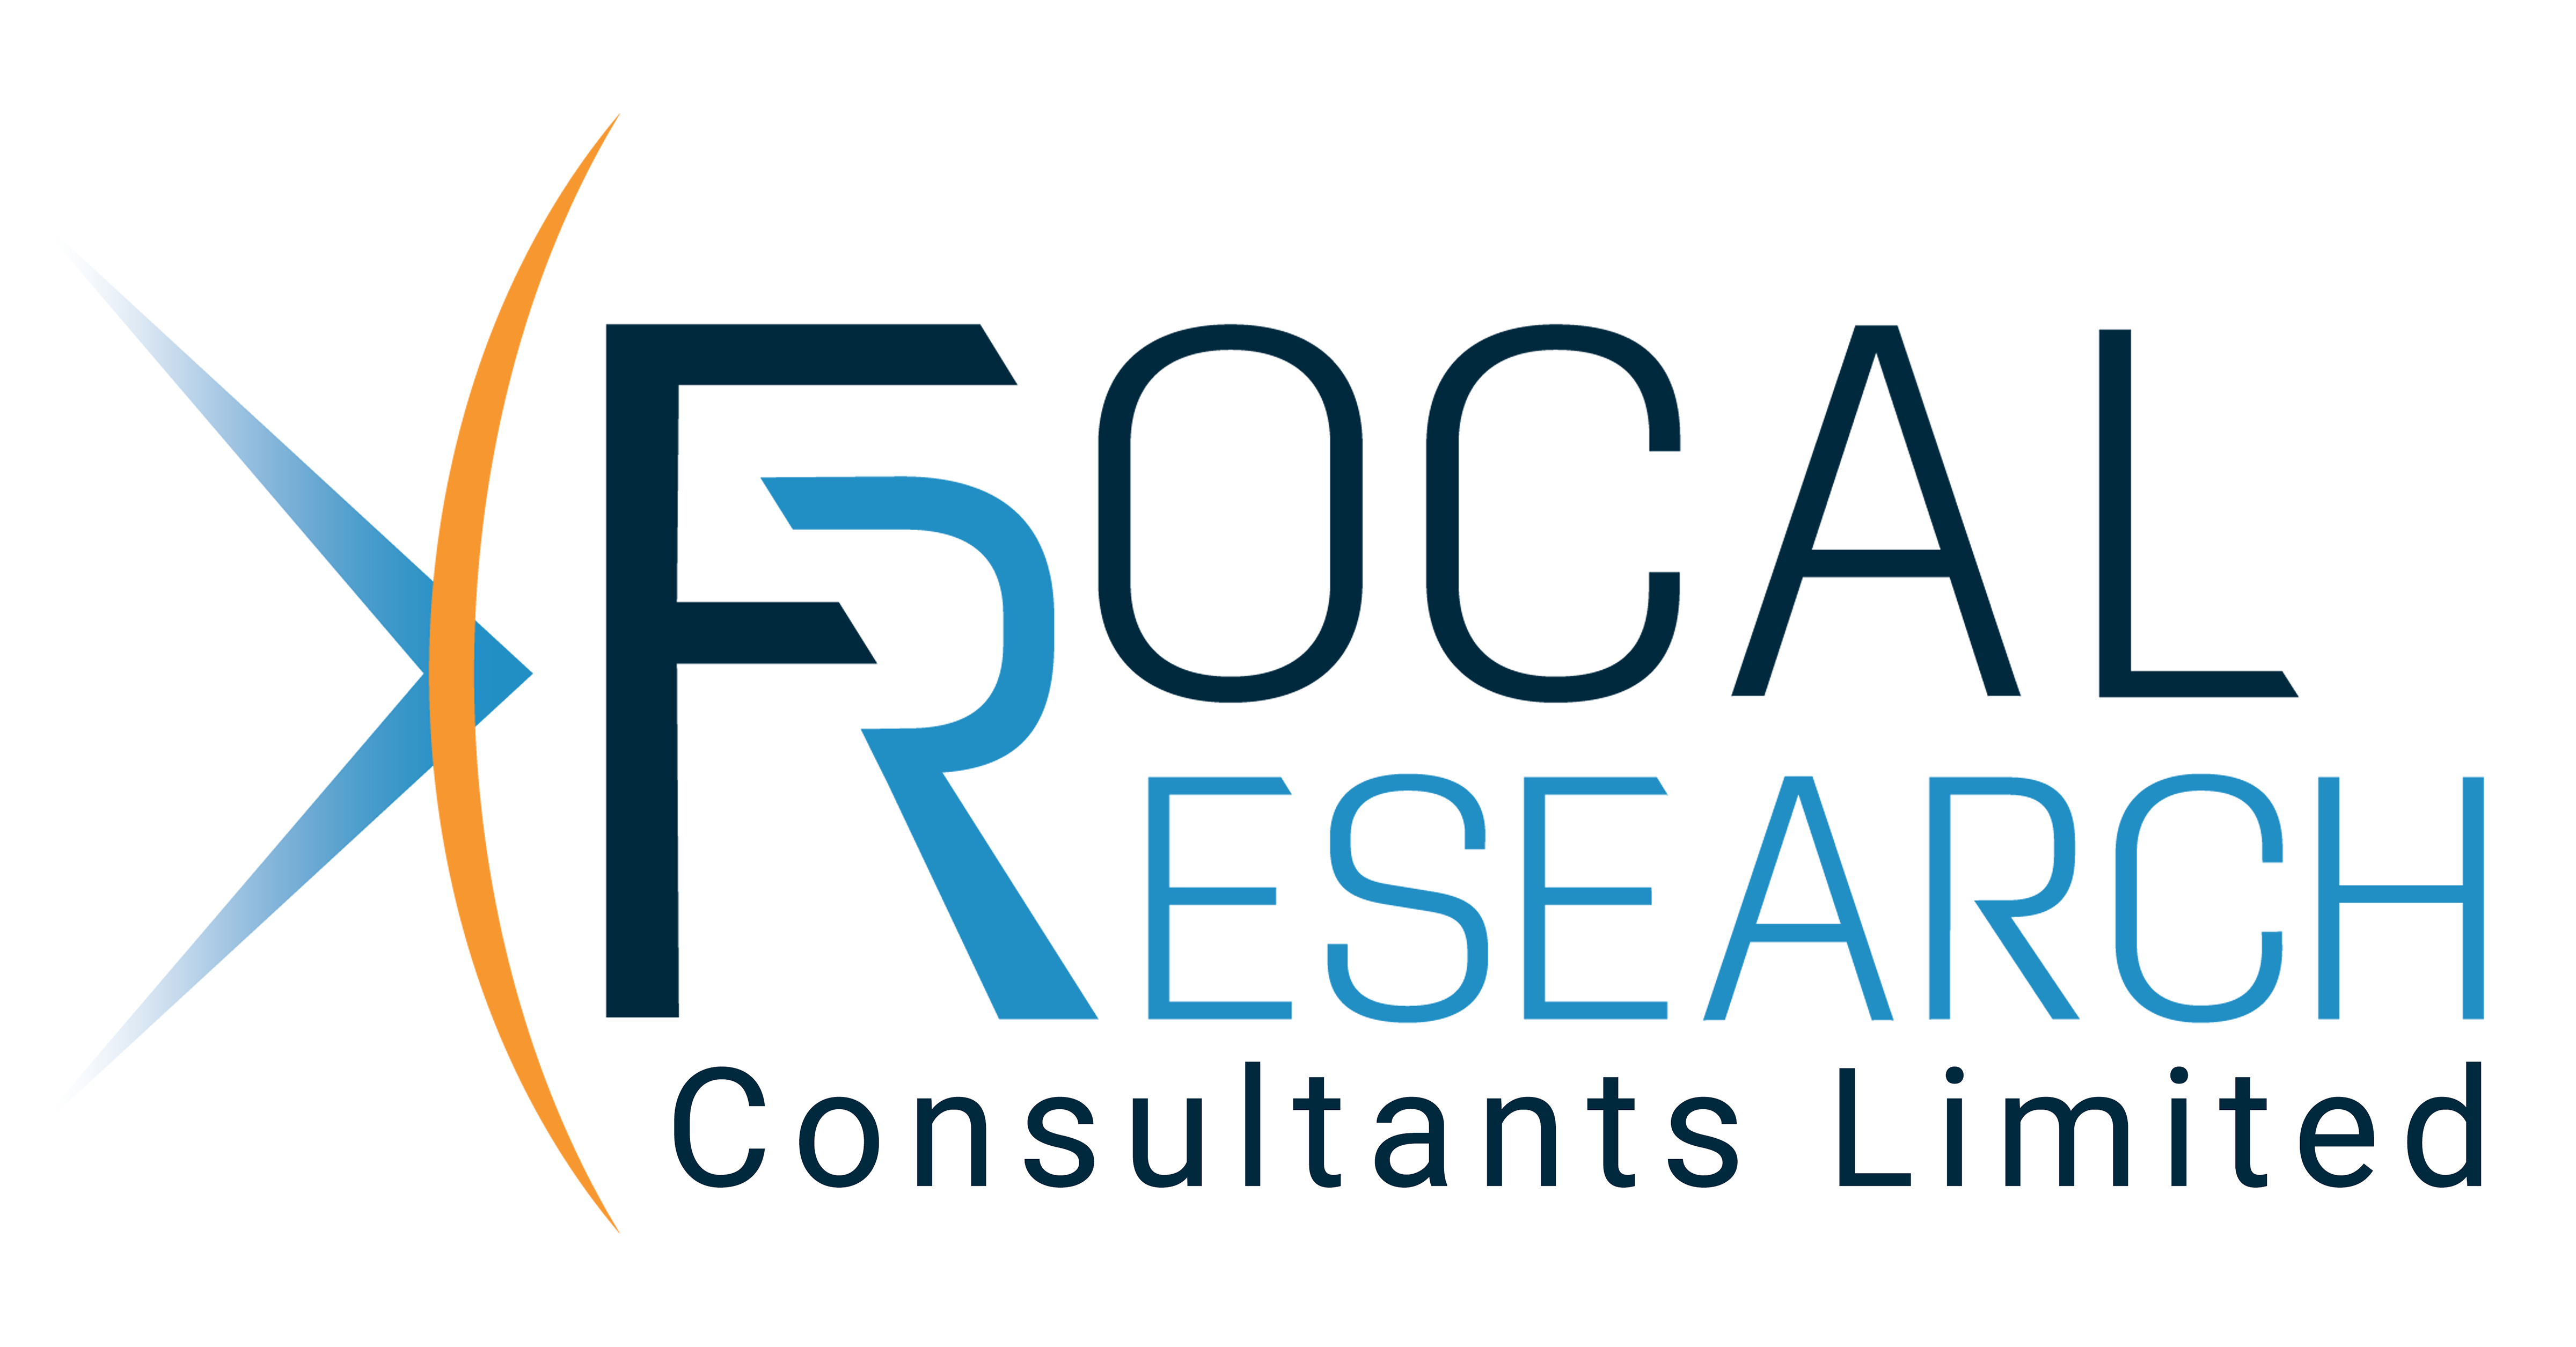 Focal Research Consultants